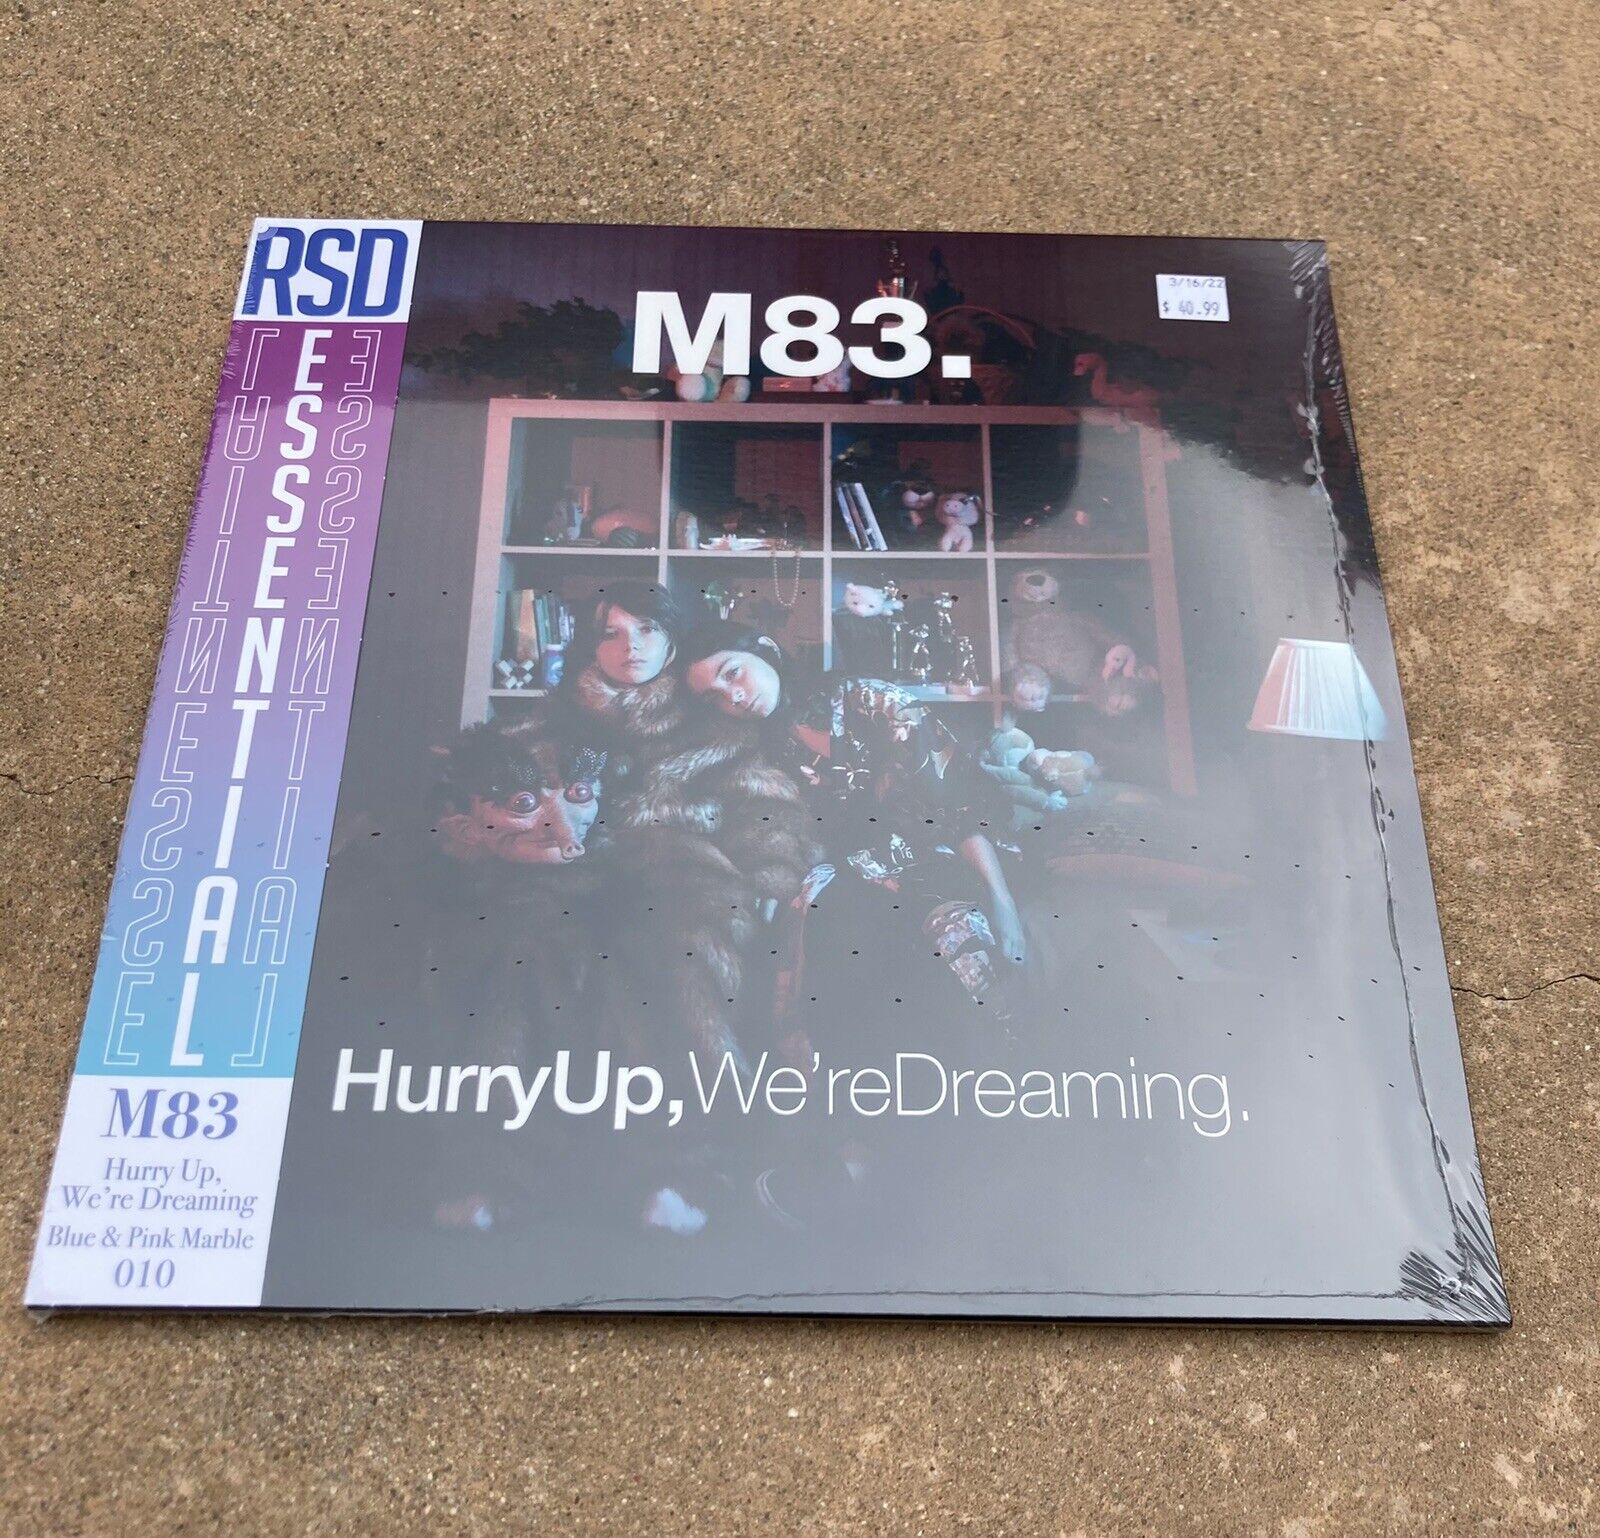 M83 Hurry Up We're Dreaming Pink Blue Marble Vinyl LP RSD Essential *SHIPS NOW*